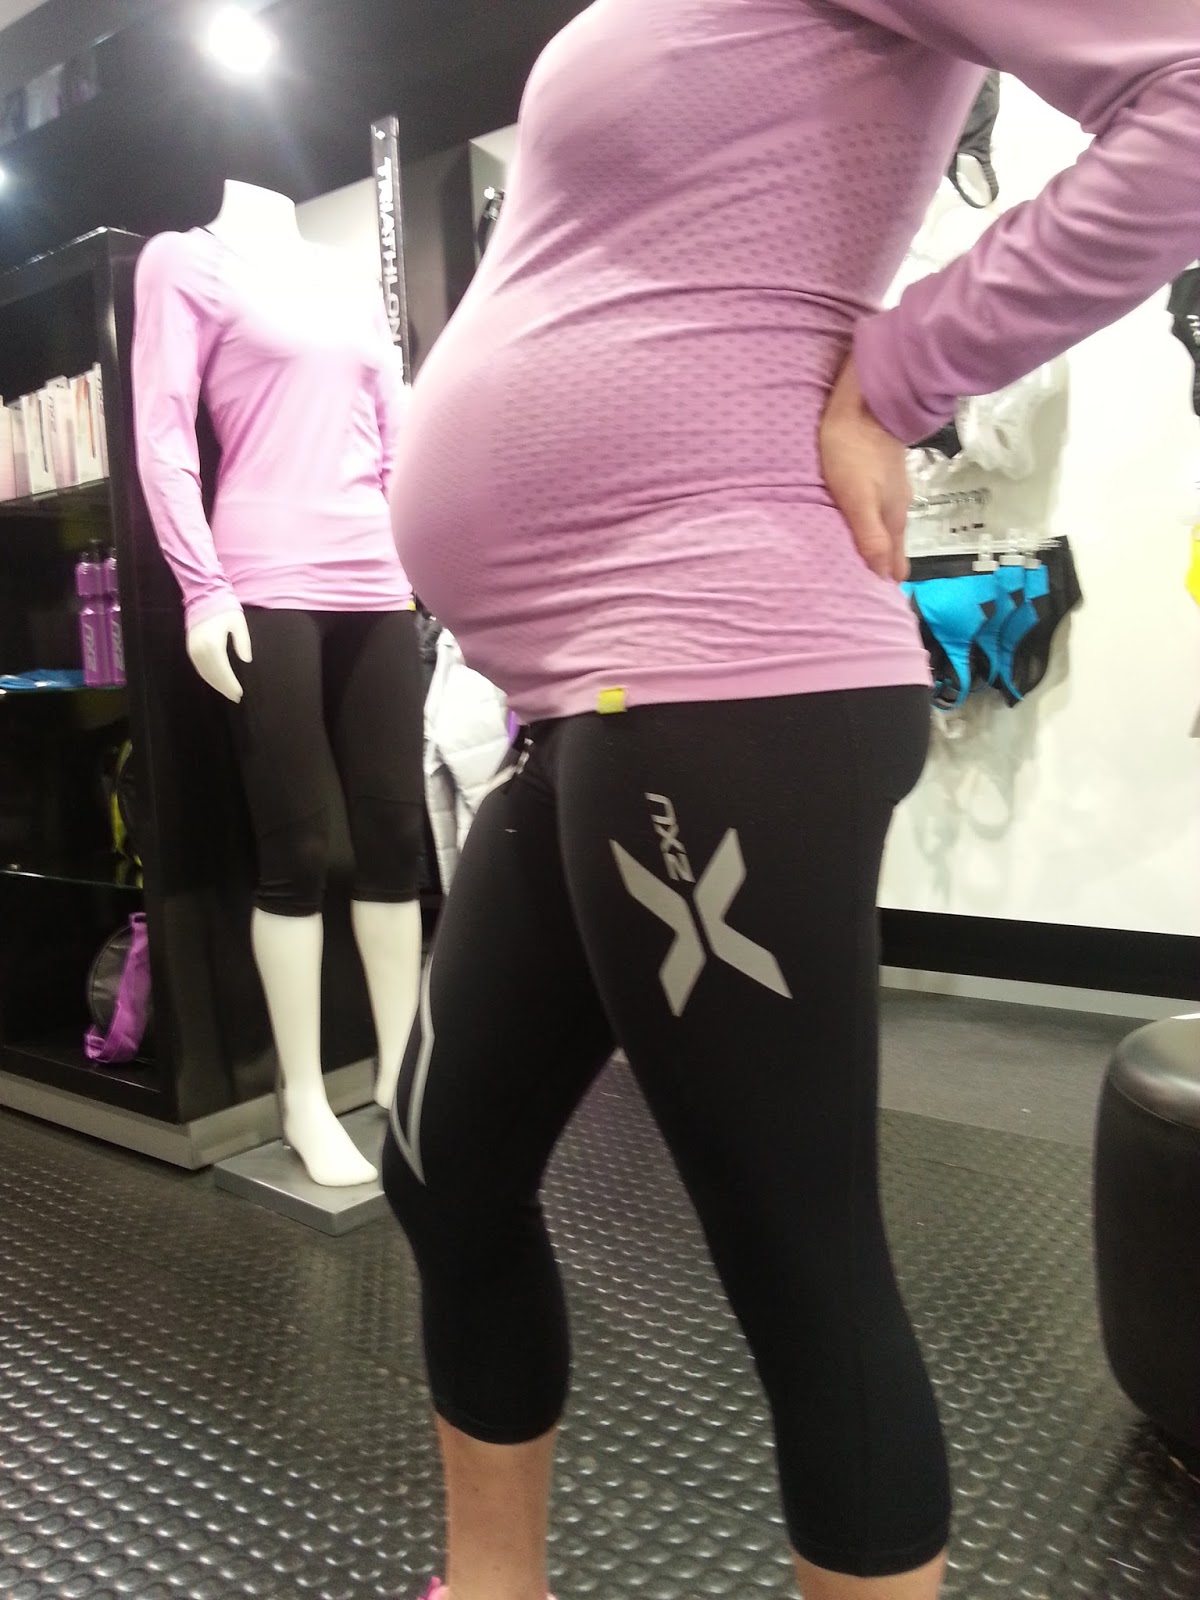 Can I wear leggings during pregnancy? - Quora